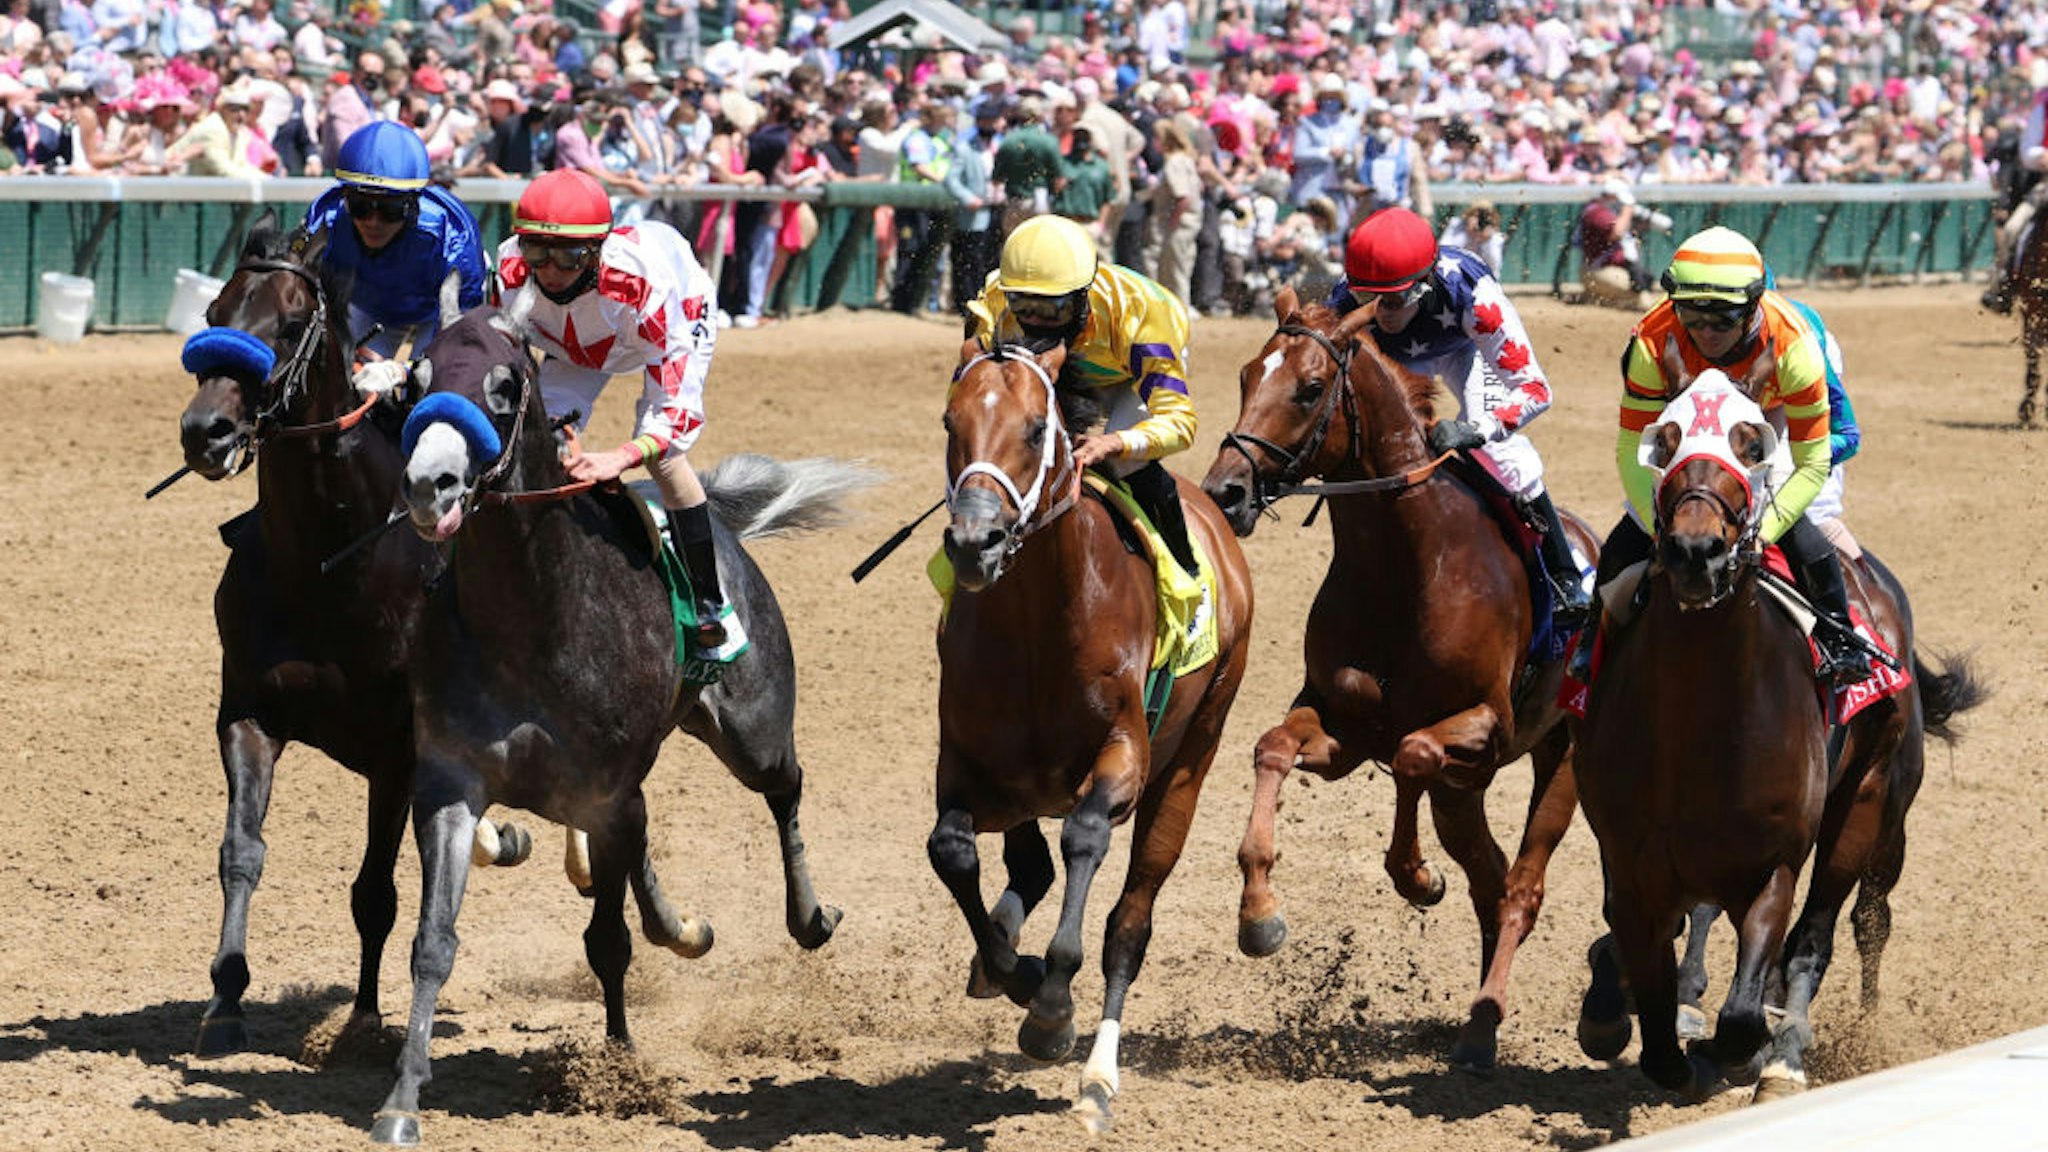 LOUISVILLE, KY - APRIL 30: Mayfield (6) ridden by Jose Ortiz on the far outside in the blue is the winner of the 18th running of The Alysheba during Oaks Day on April 30, 2021 at Churchill Downs in Louisville, Kentucky. (Photo by Brian Spurlock/Icon Sportswire via Getty Images)